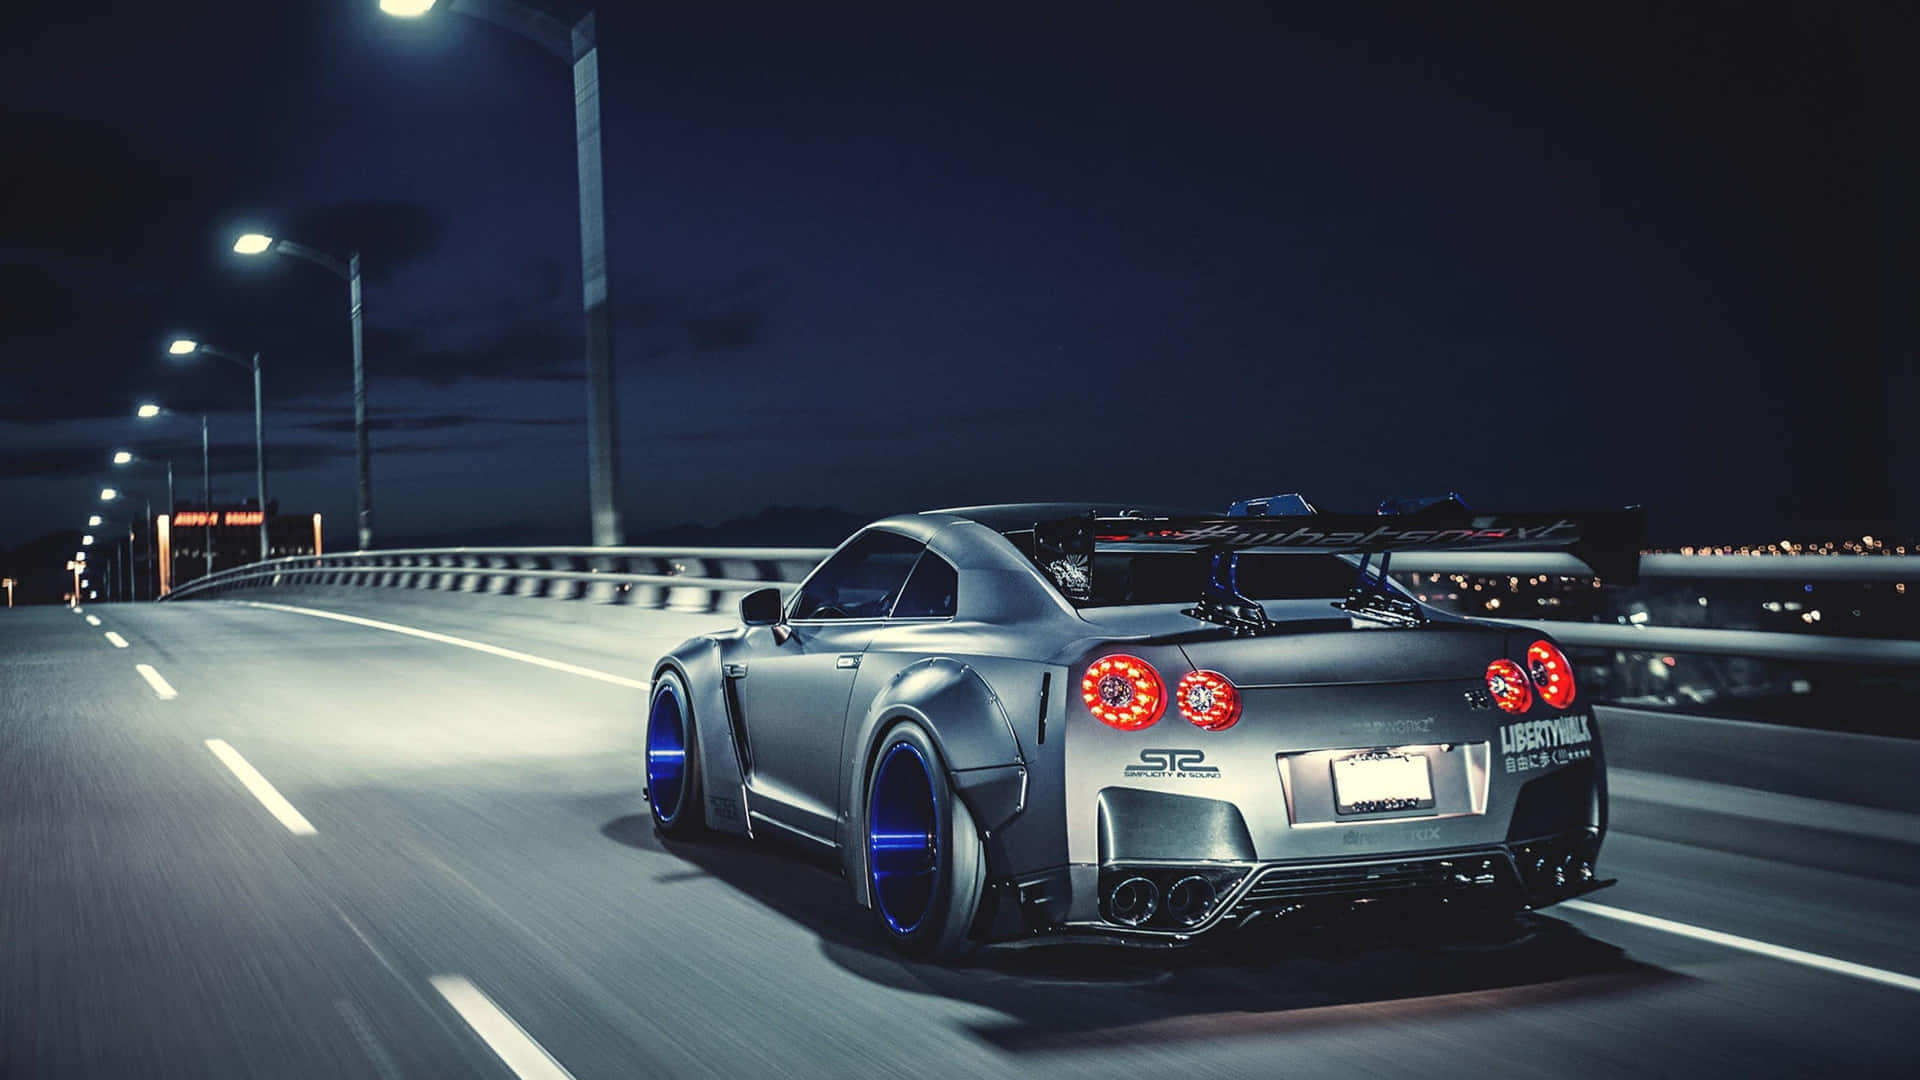 Capture the Speed and Design of the Cool Nissan Skyline Wallpaper